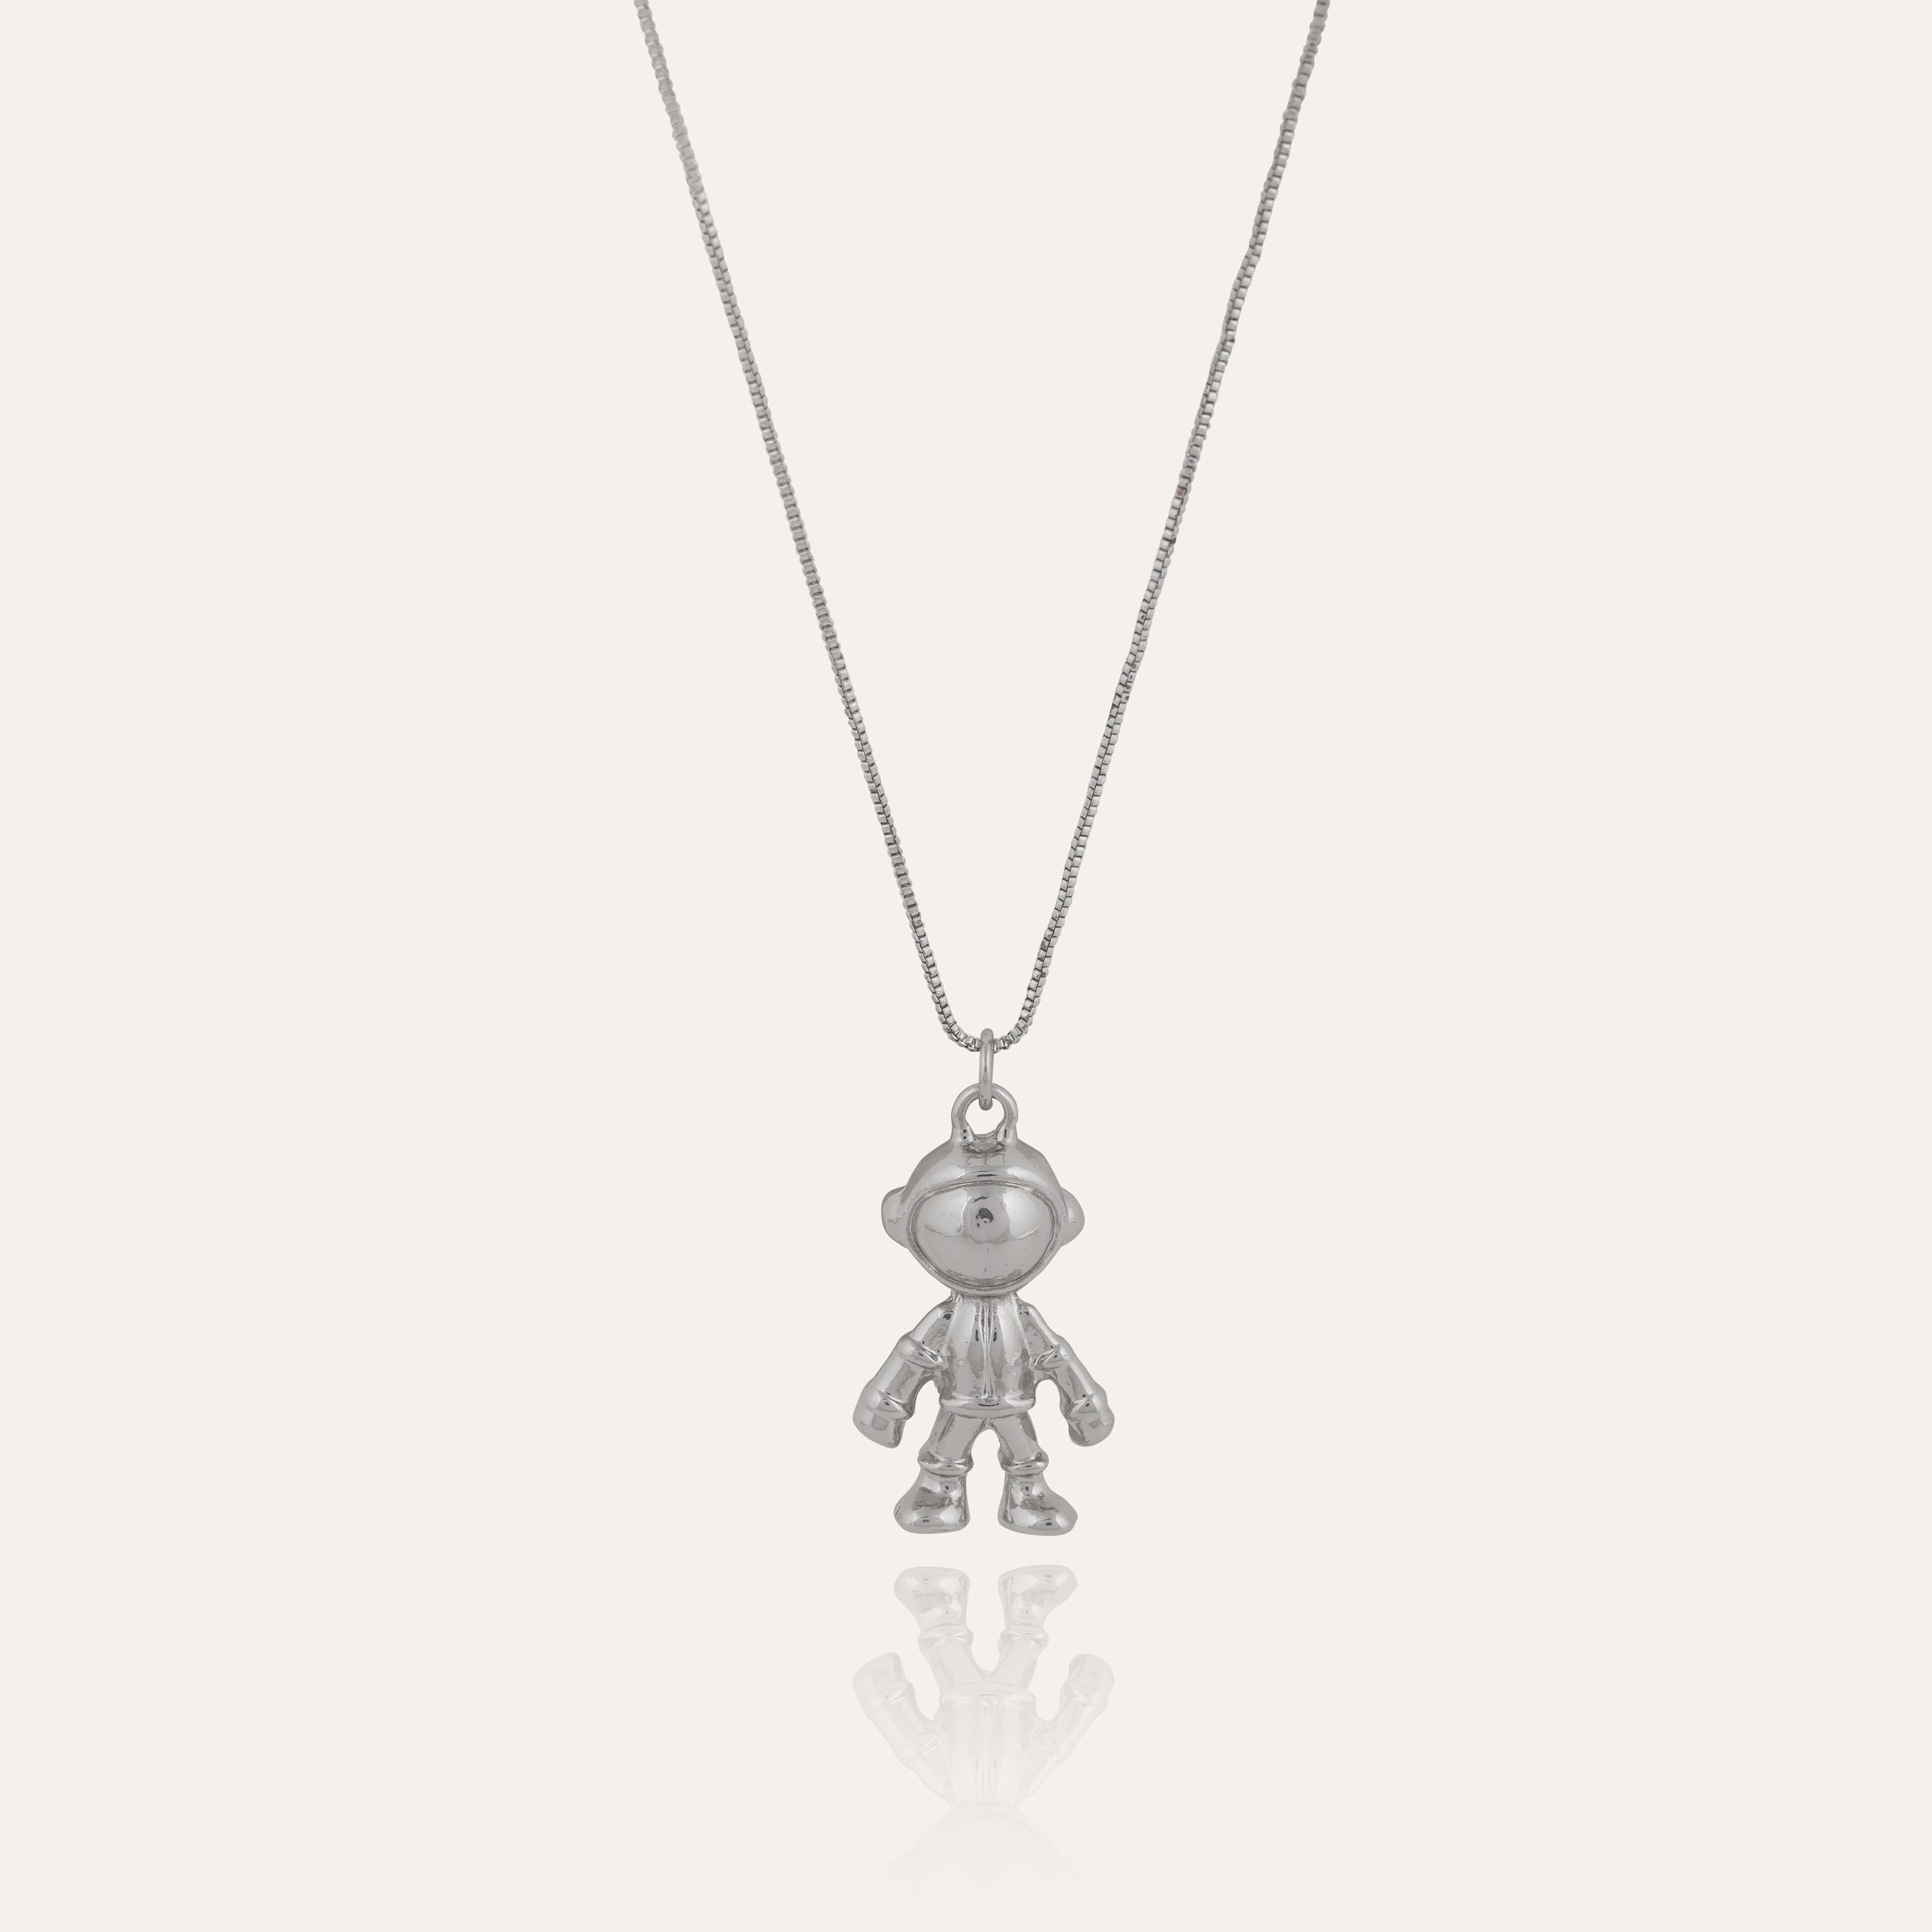 TFC Spaceman Silver Plated Pendant Necklace-Enhance your elegance with our collection of gold-plated necklaces for women. Choose from stunning pendant necklaces, chic choker necklaces, and trendy layered necklaces. Our sleek and dainty designs are both affordable and anti-tarnish, ensuring lasting beauty. Enjoy the cheapest fashion jewellery, lightweight and stylish- only at The Fun Company